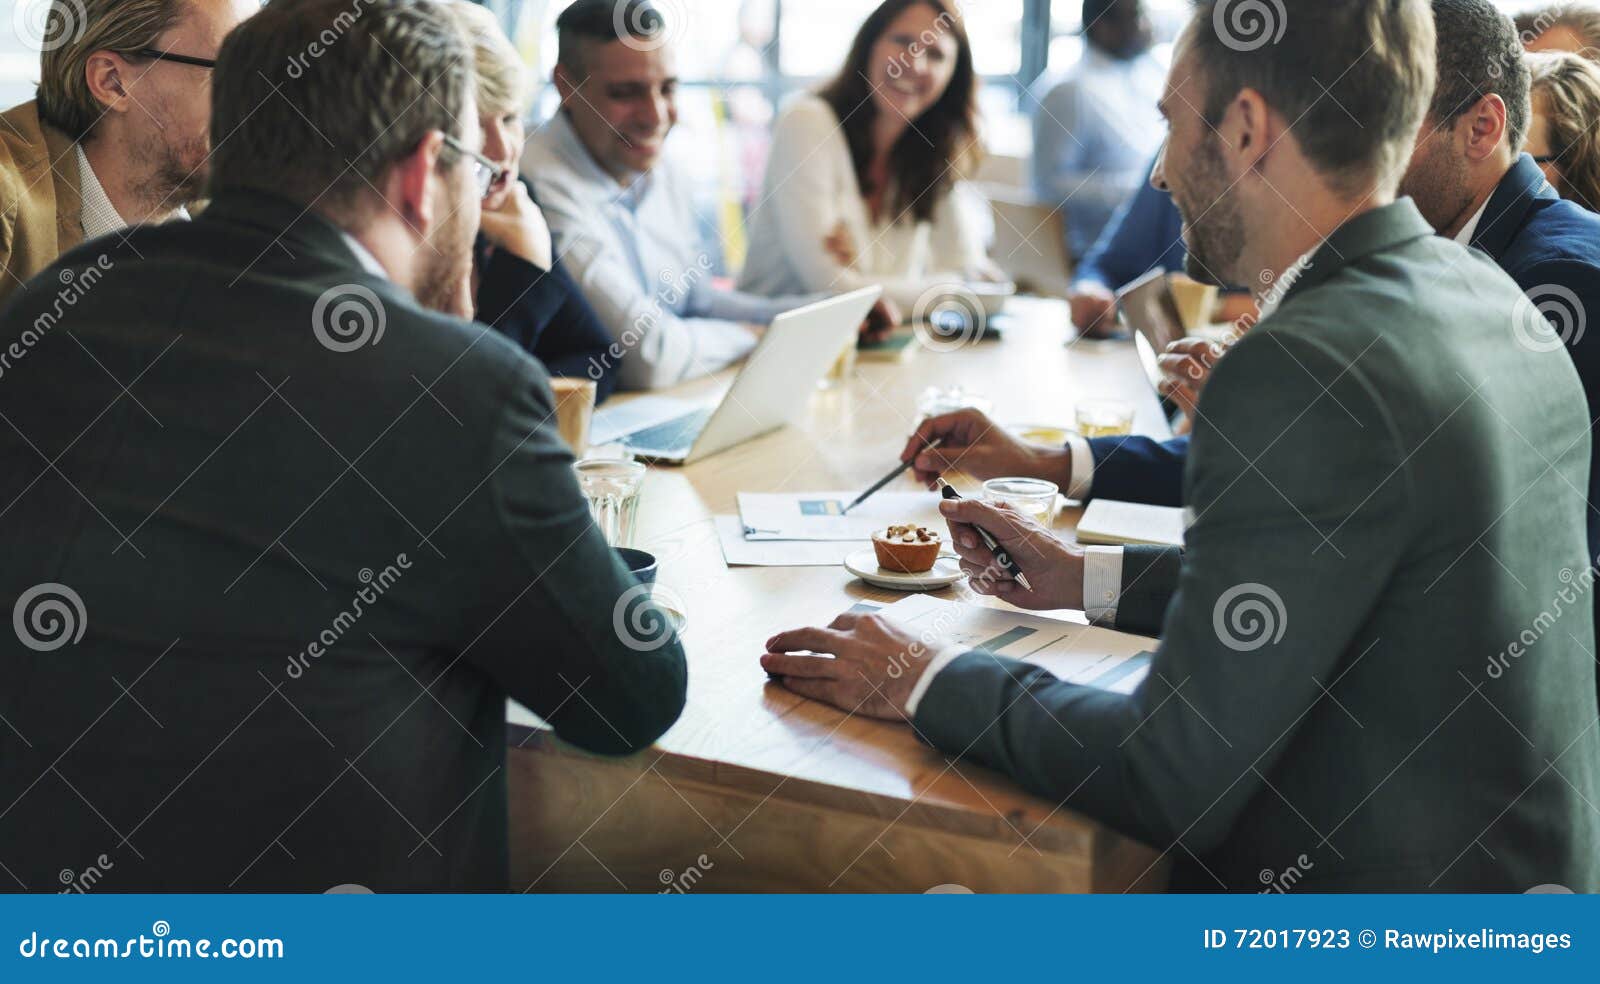 business people meeting conference discussion corporate concept